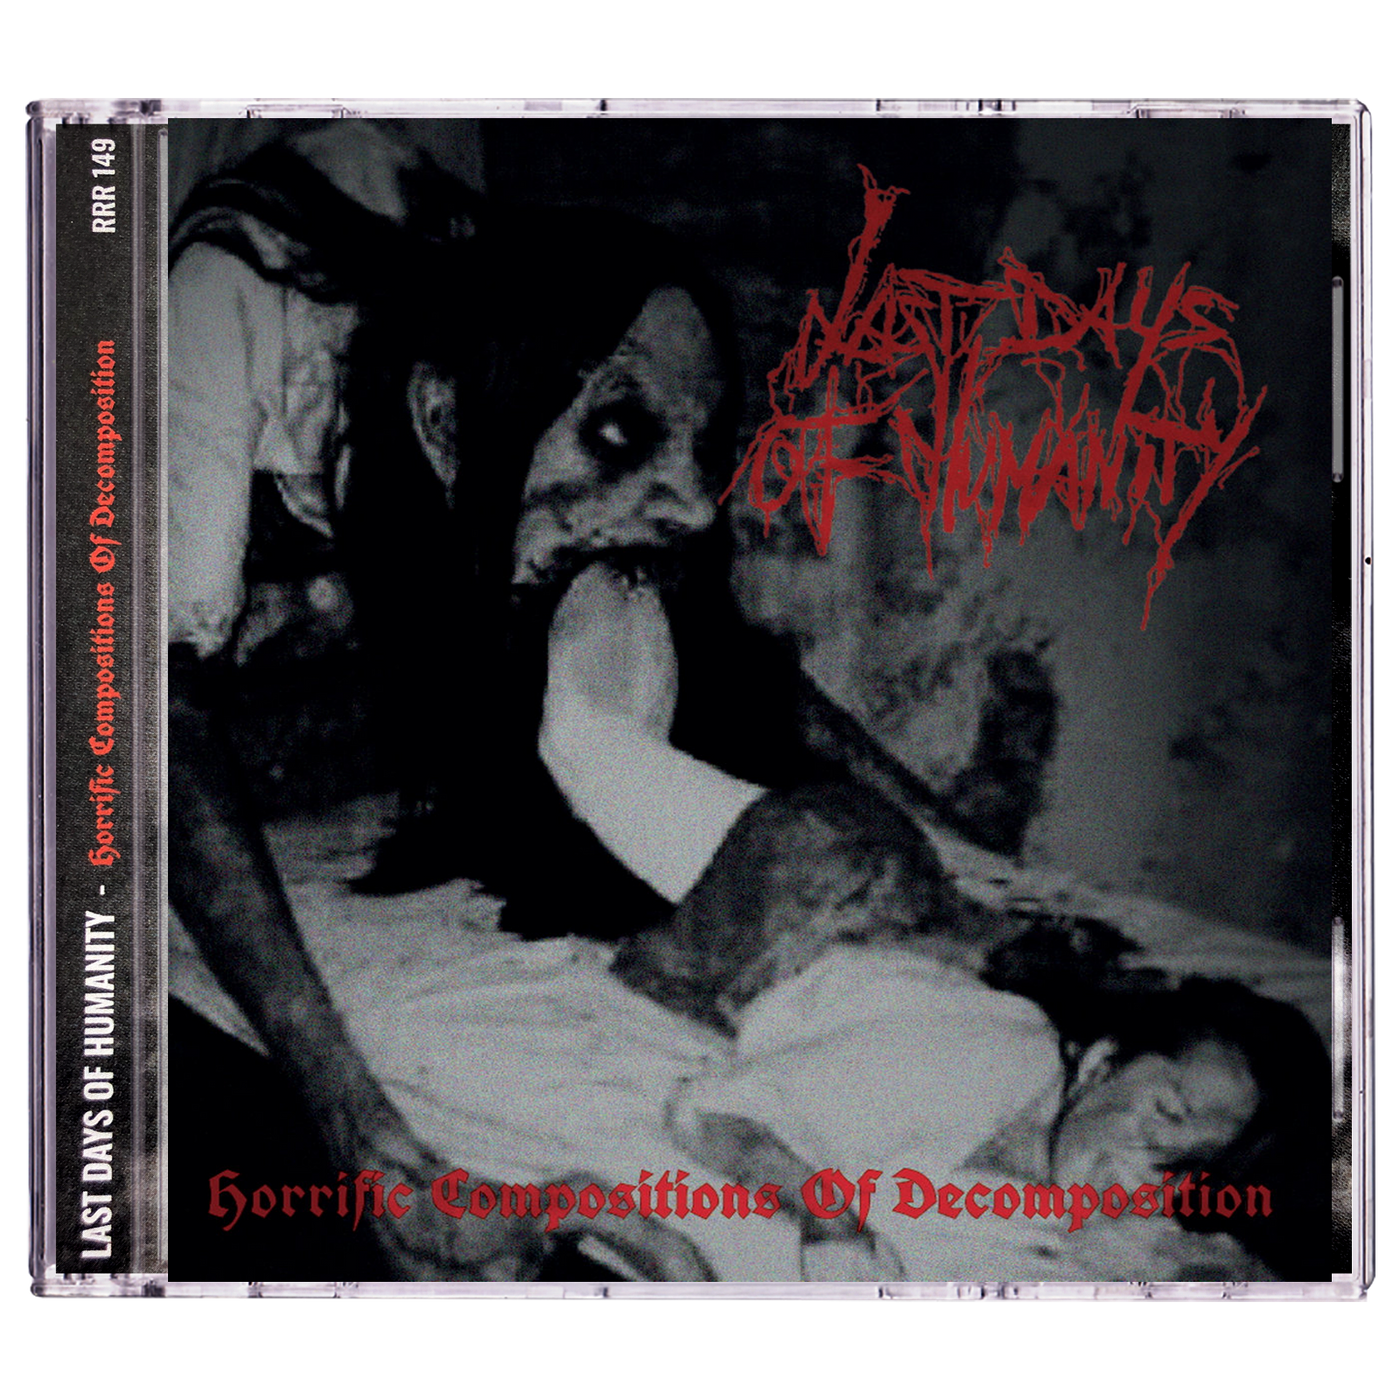 Last Days Of Humanity 'Horrific Compositions Of Decomposition' CD